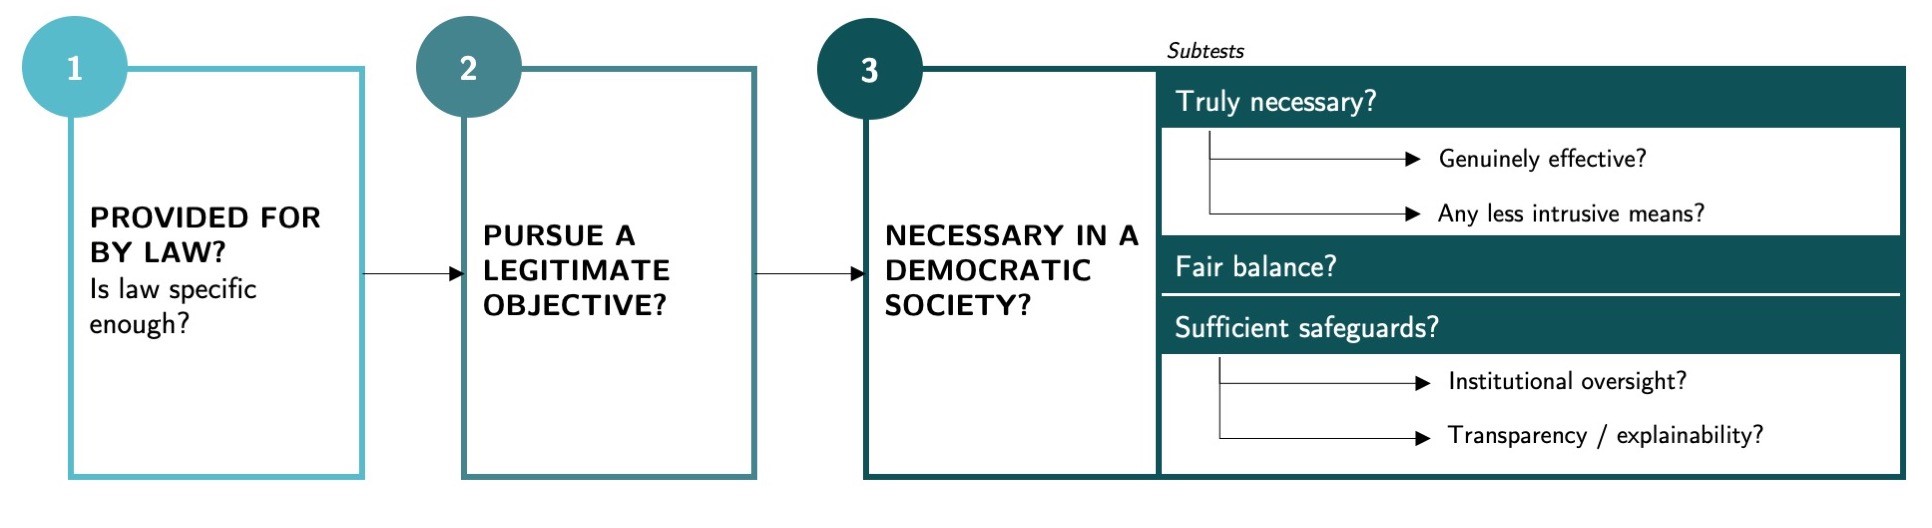 Figure 1: Overview of the three steps of the proportionality test